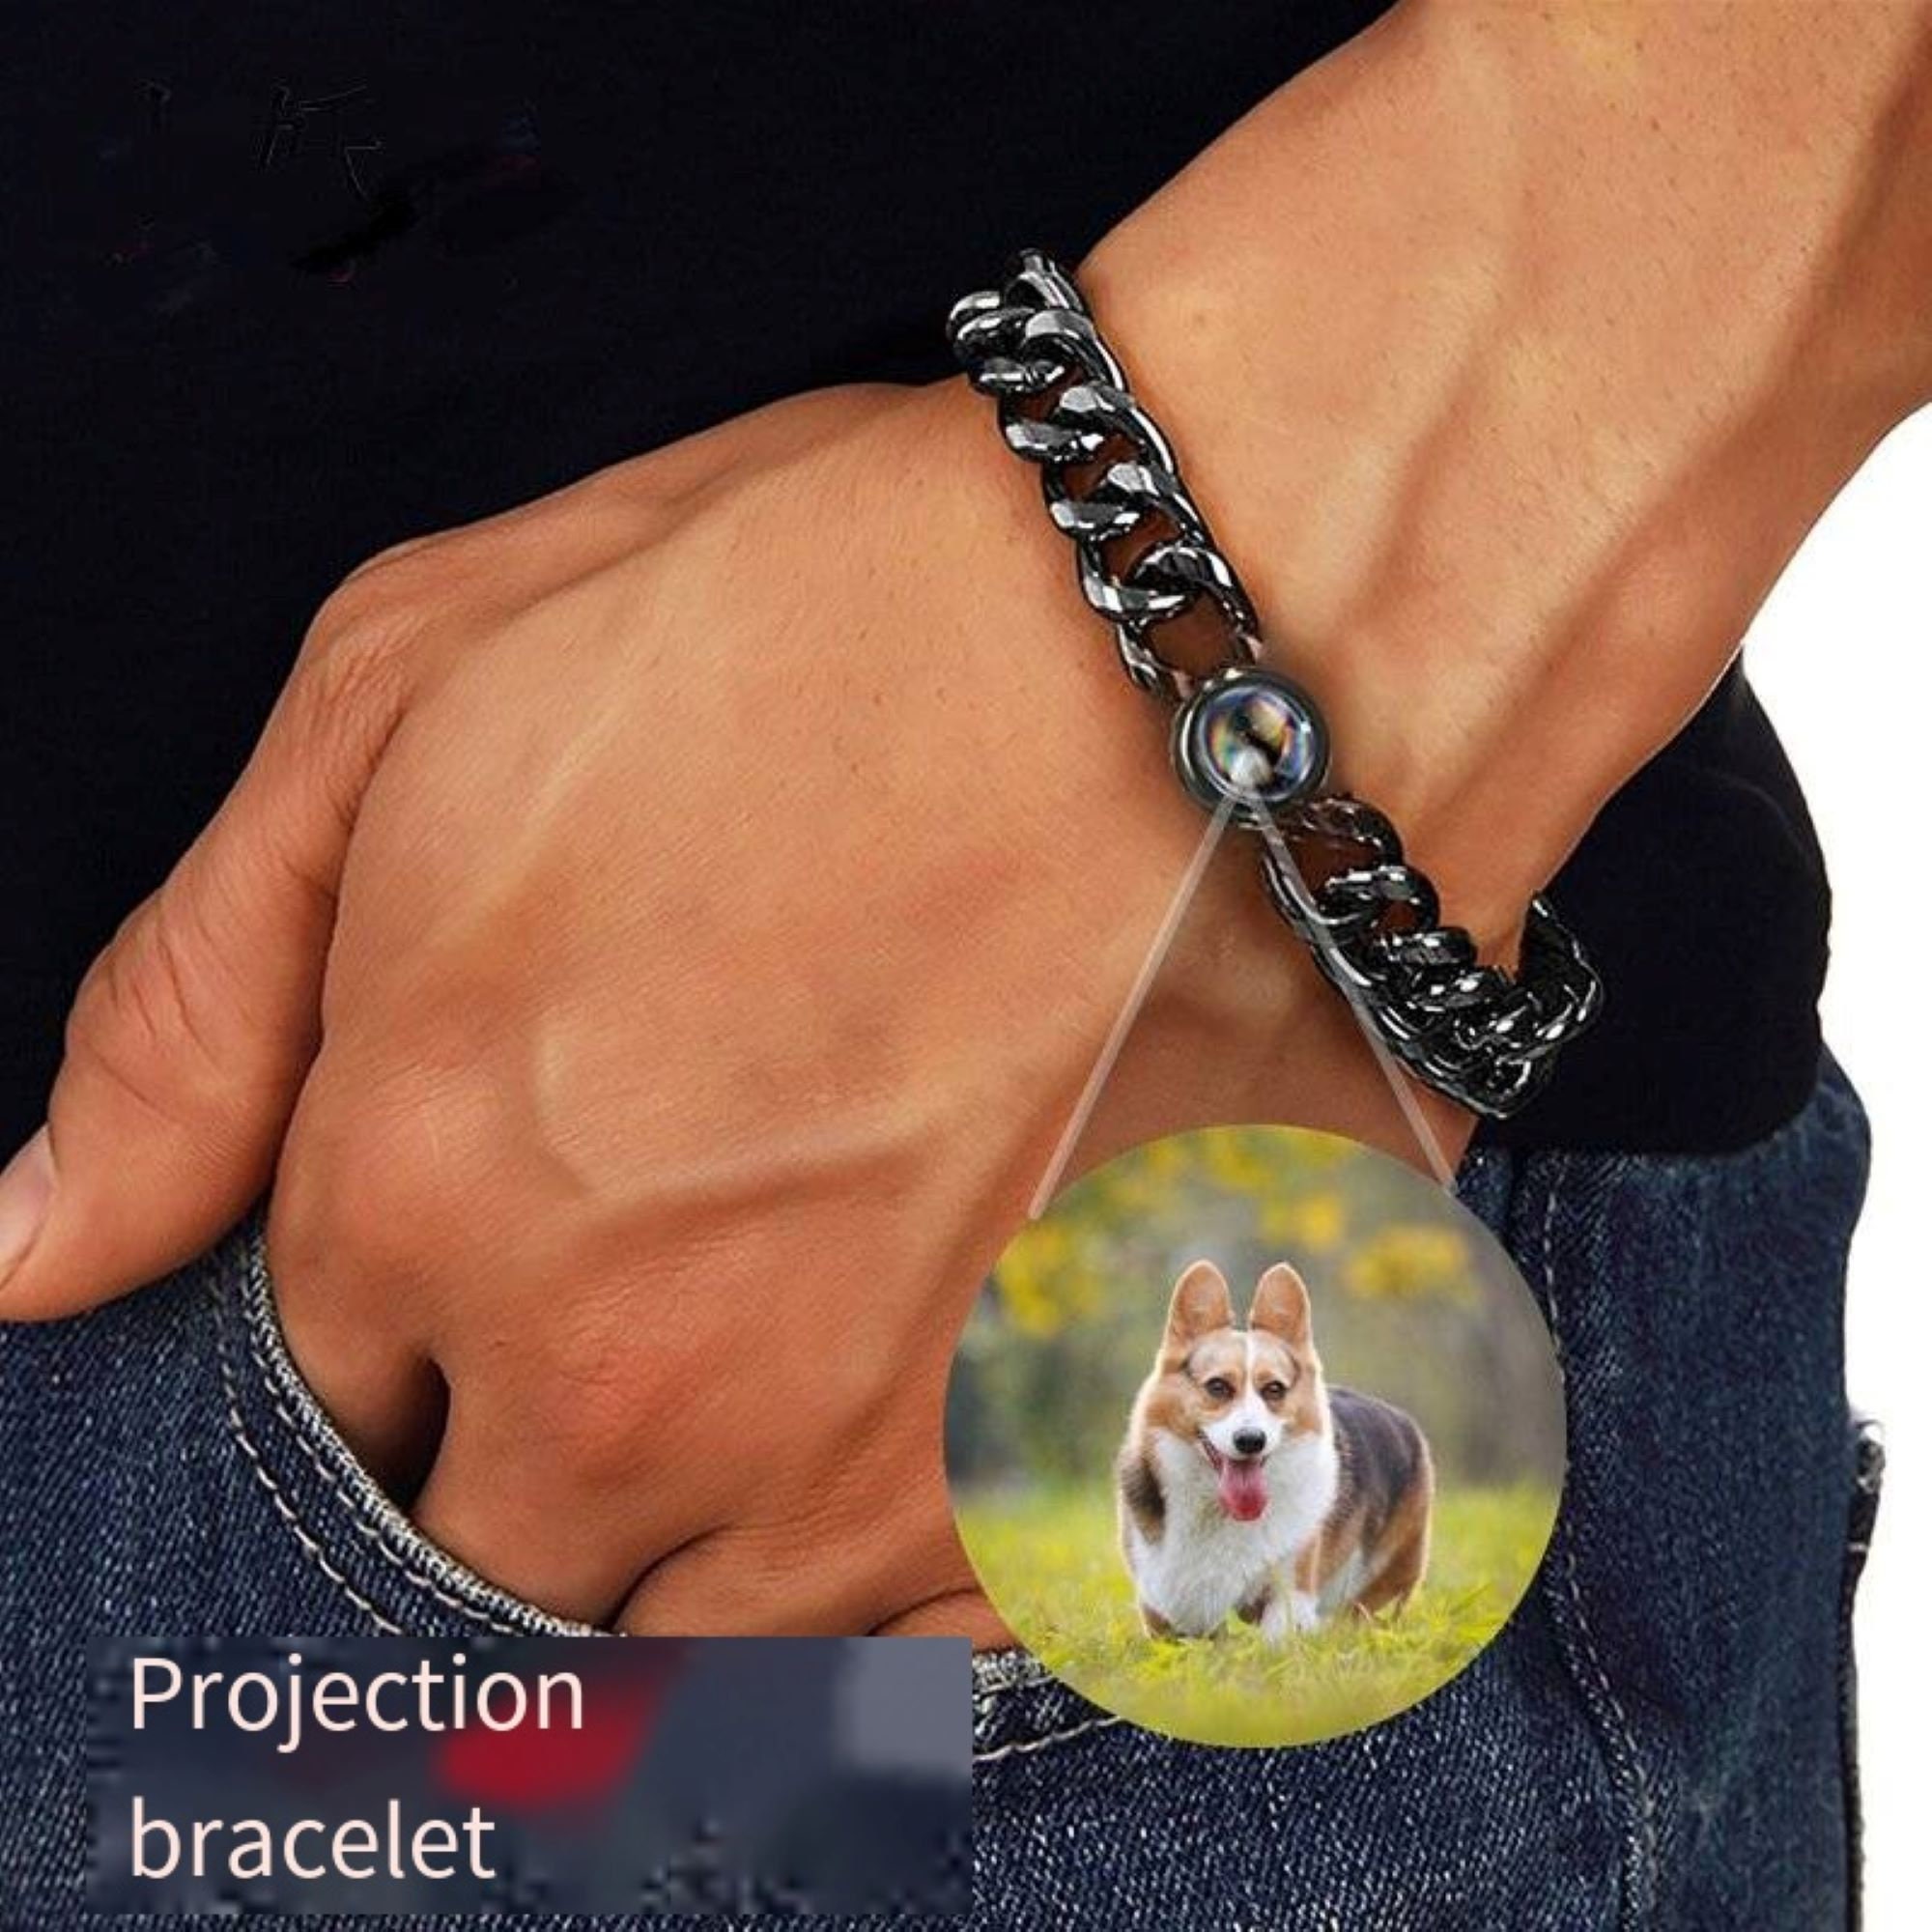 Photo Projection Bracelet, Personalized Picture Projection Charm, Beaded  Bracelet, Handmade Minimalism Photo Jewelry, Christmas Gift for Her - Etsy